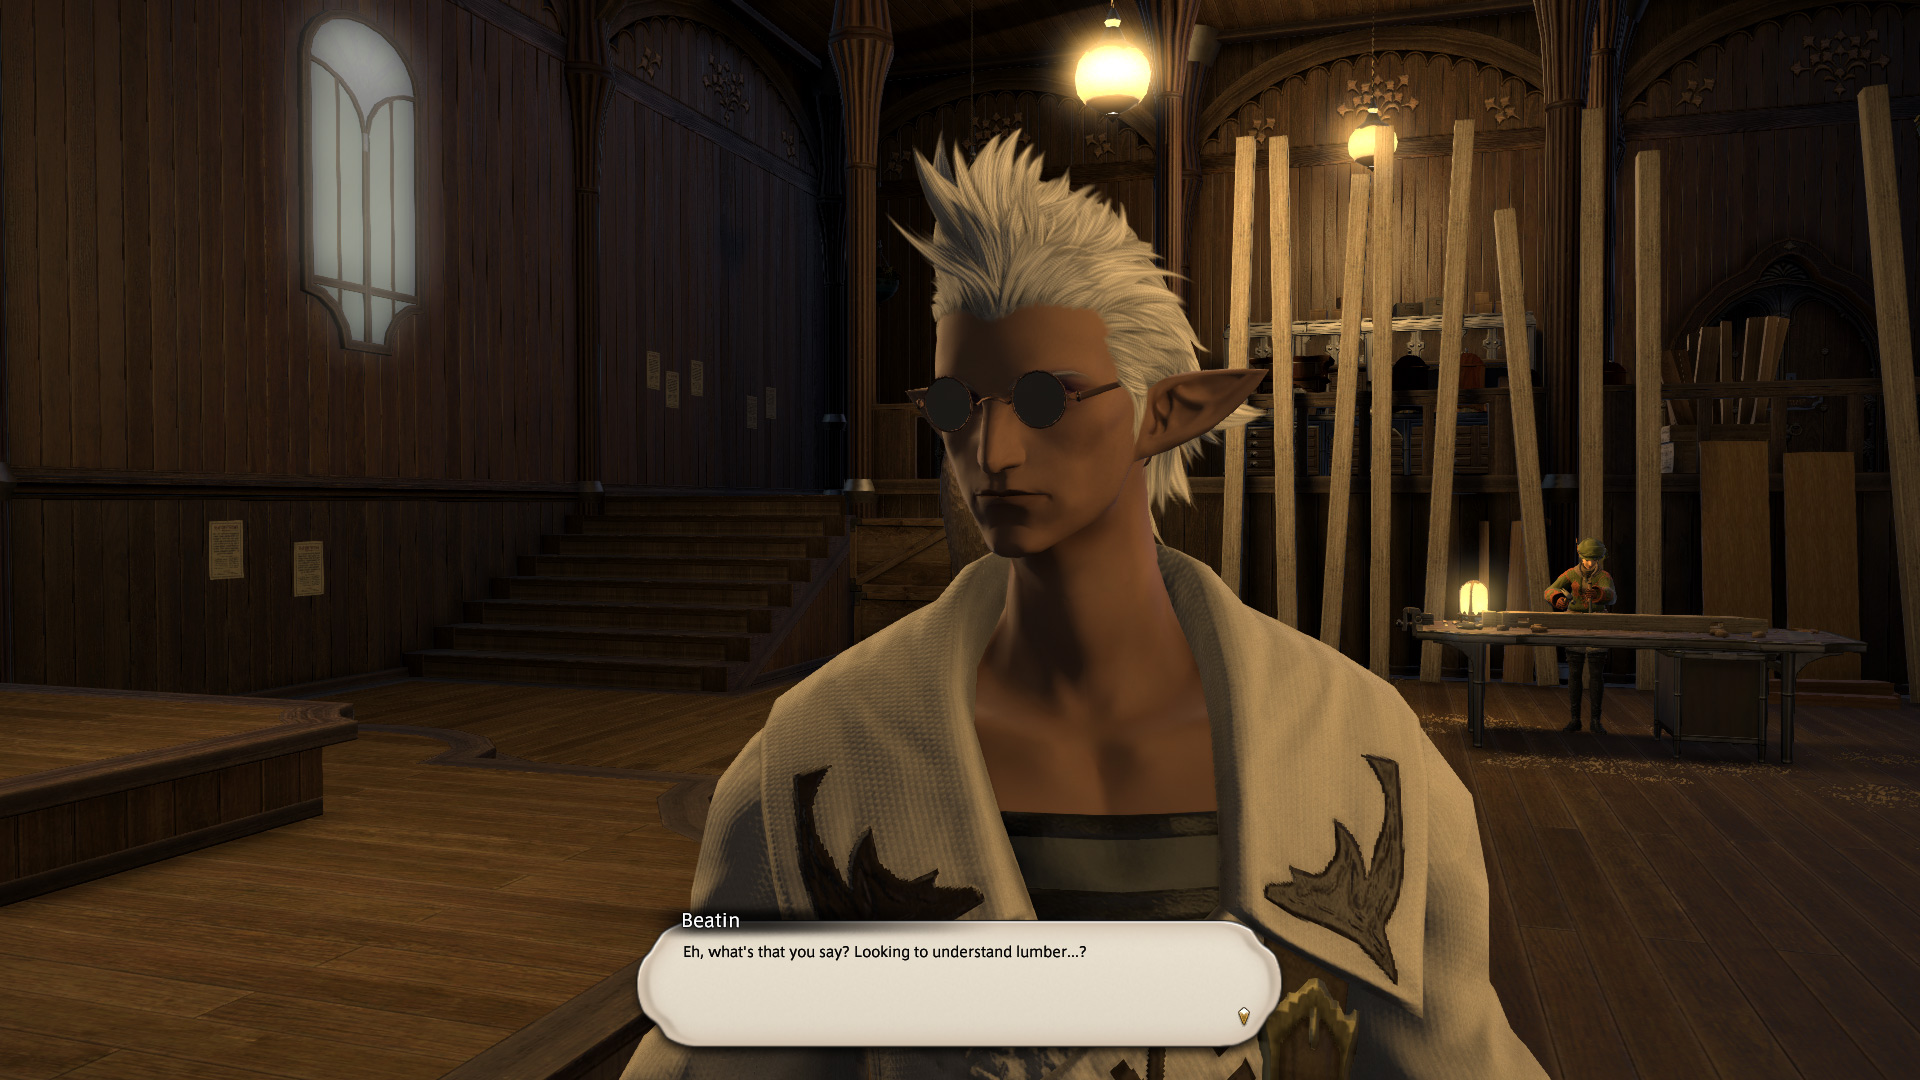 Screenshot of Beatin, who has pointy ears, spiked white hair, and circular black lensed sunglasses. He's asking the player character if they want to get familiar with lumber